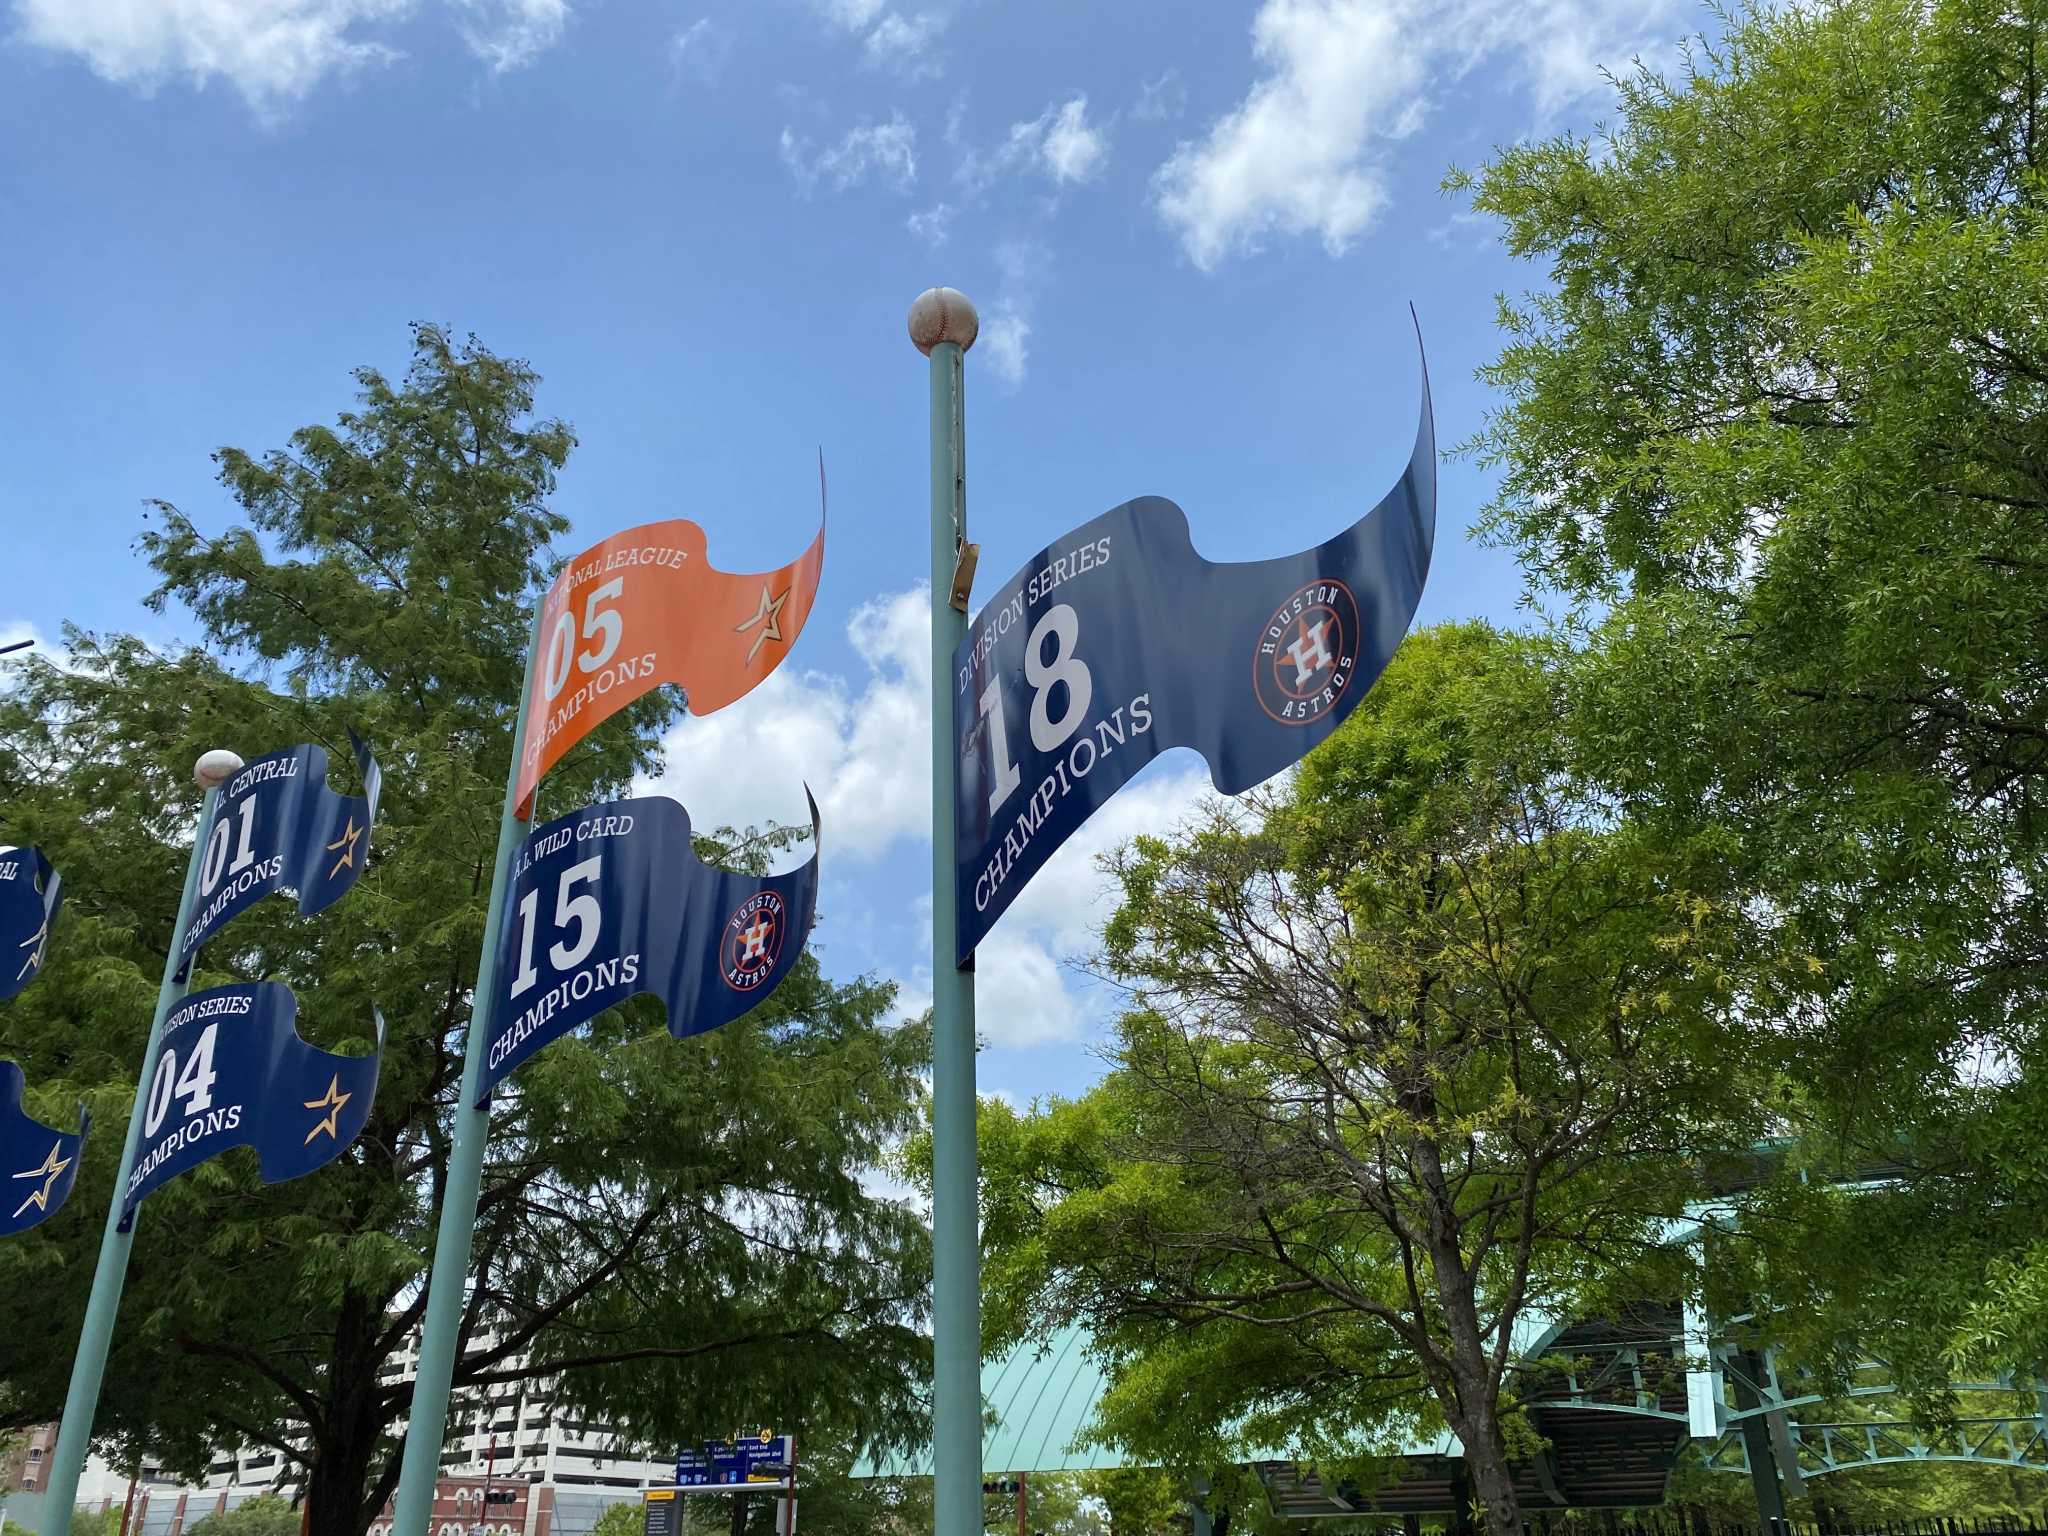 Section of wrap depicting 2018 World Series flag stolen from